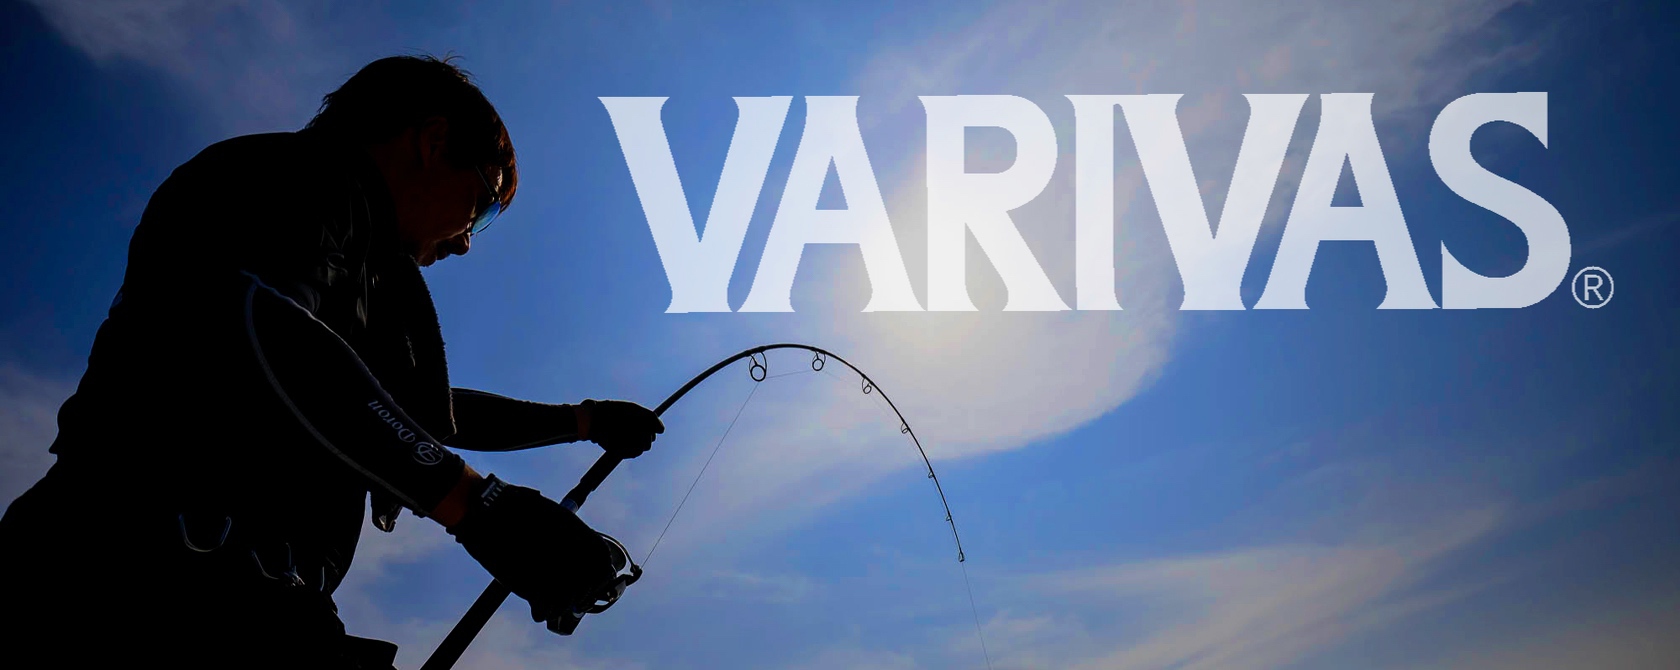 40 Years Ago: The Launch of VARIVAS brand fishing line in 1980